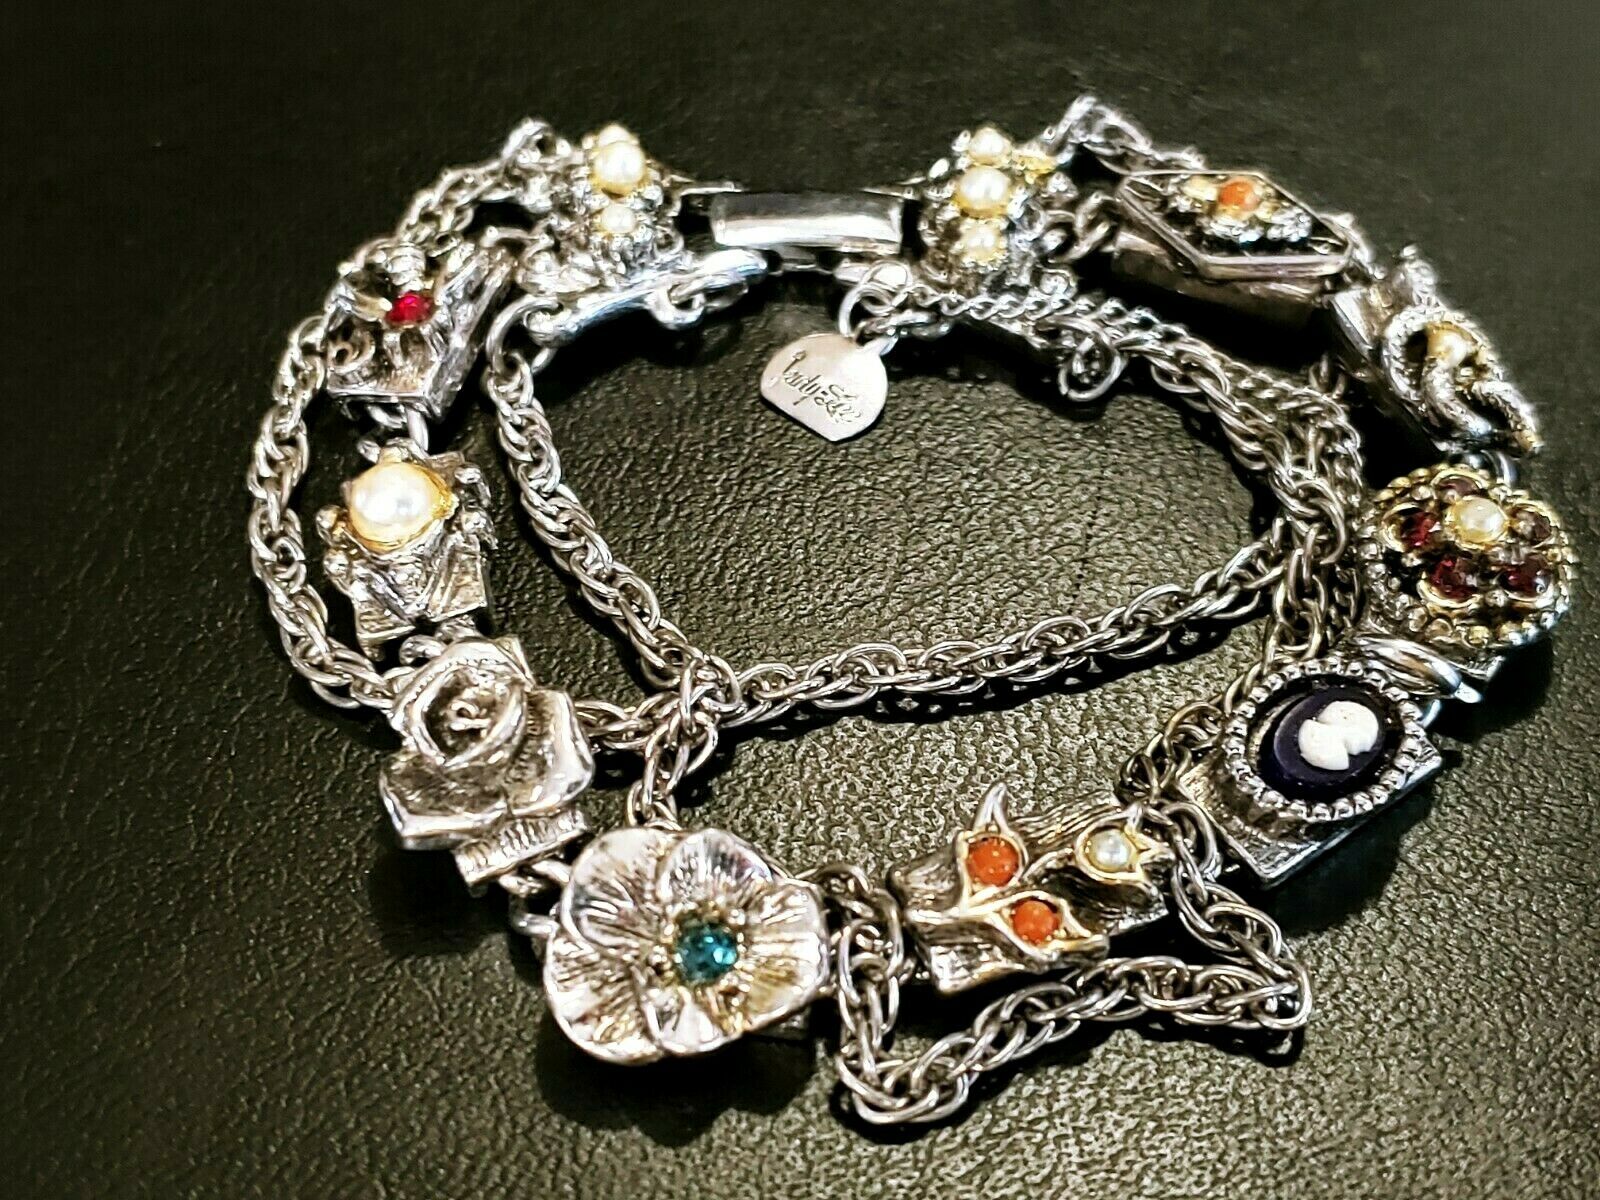 Stunning Vintage Judy Lee Silver Tone 3 Chain Charm Bracelet Cameo Flowers